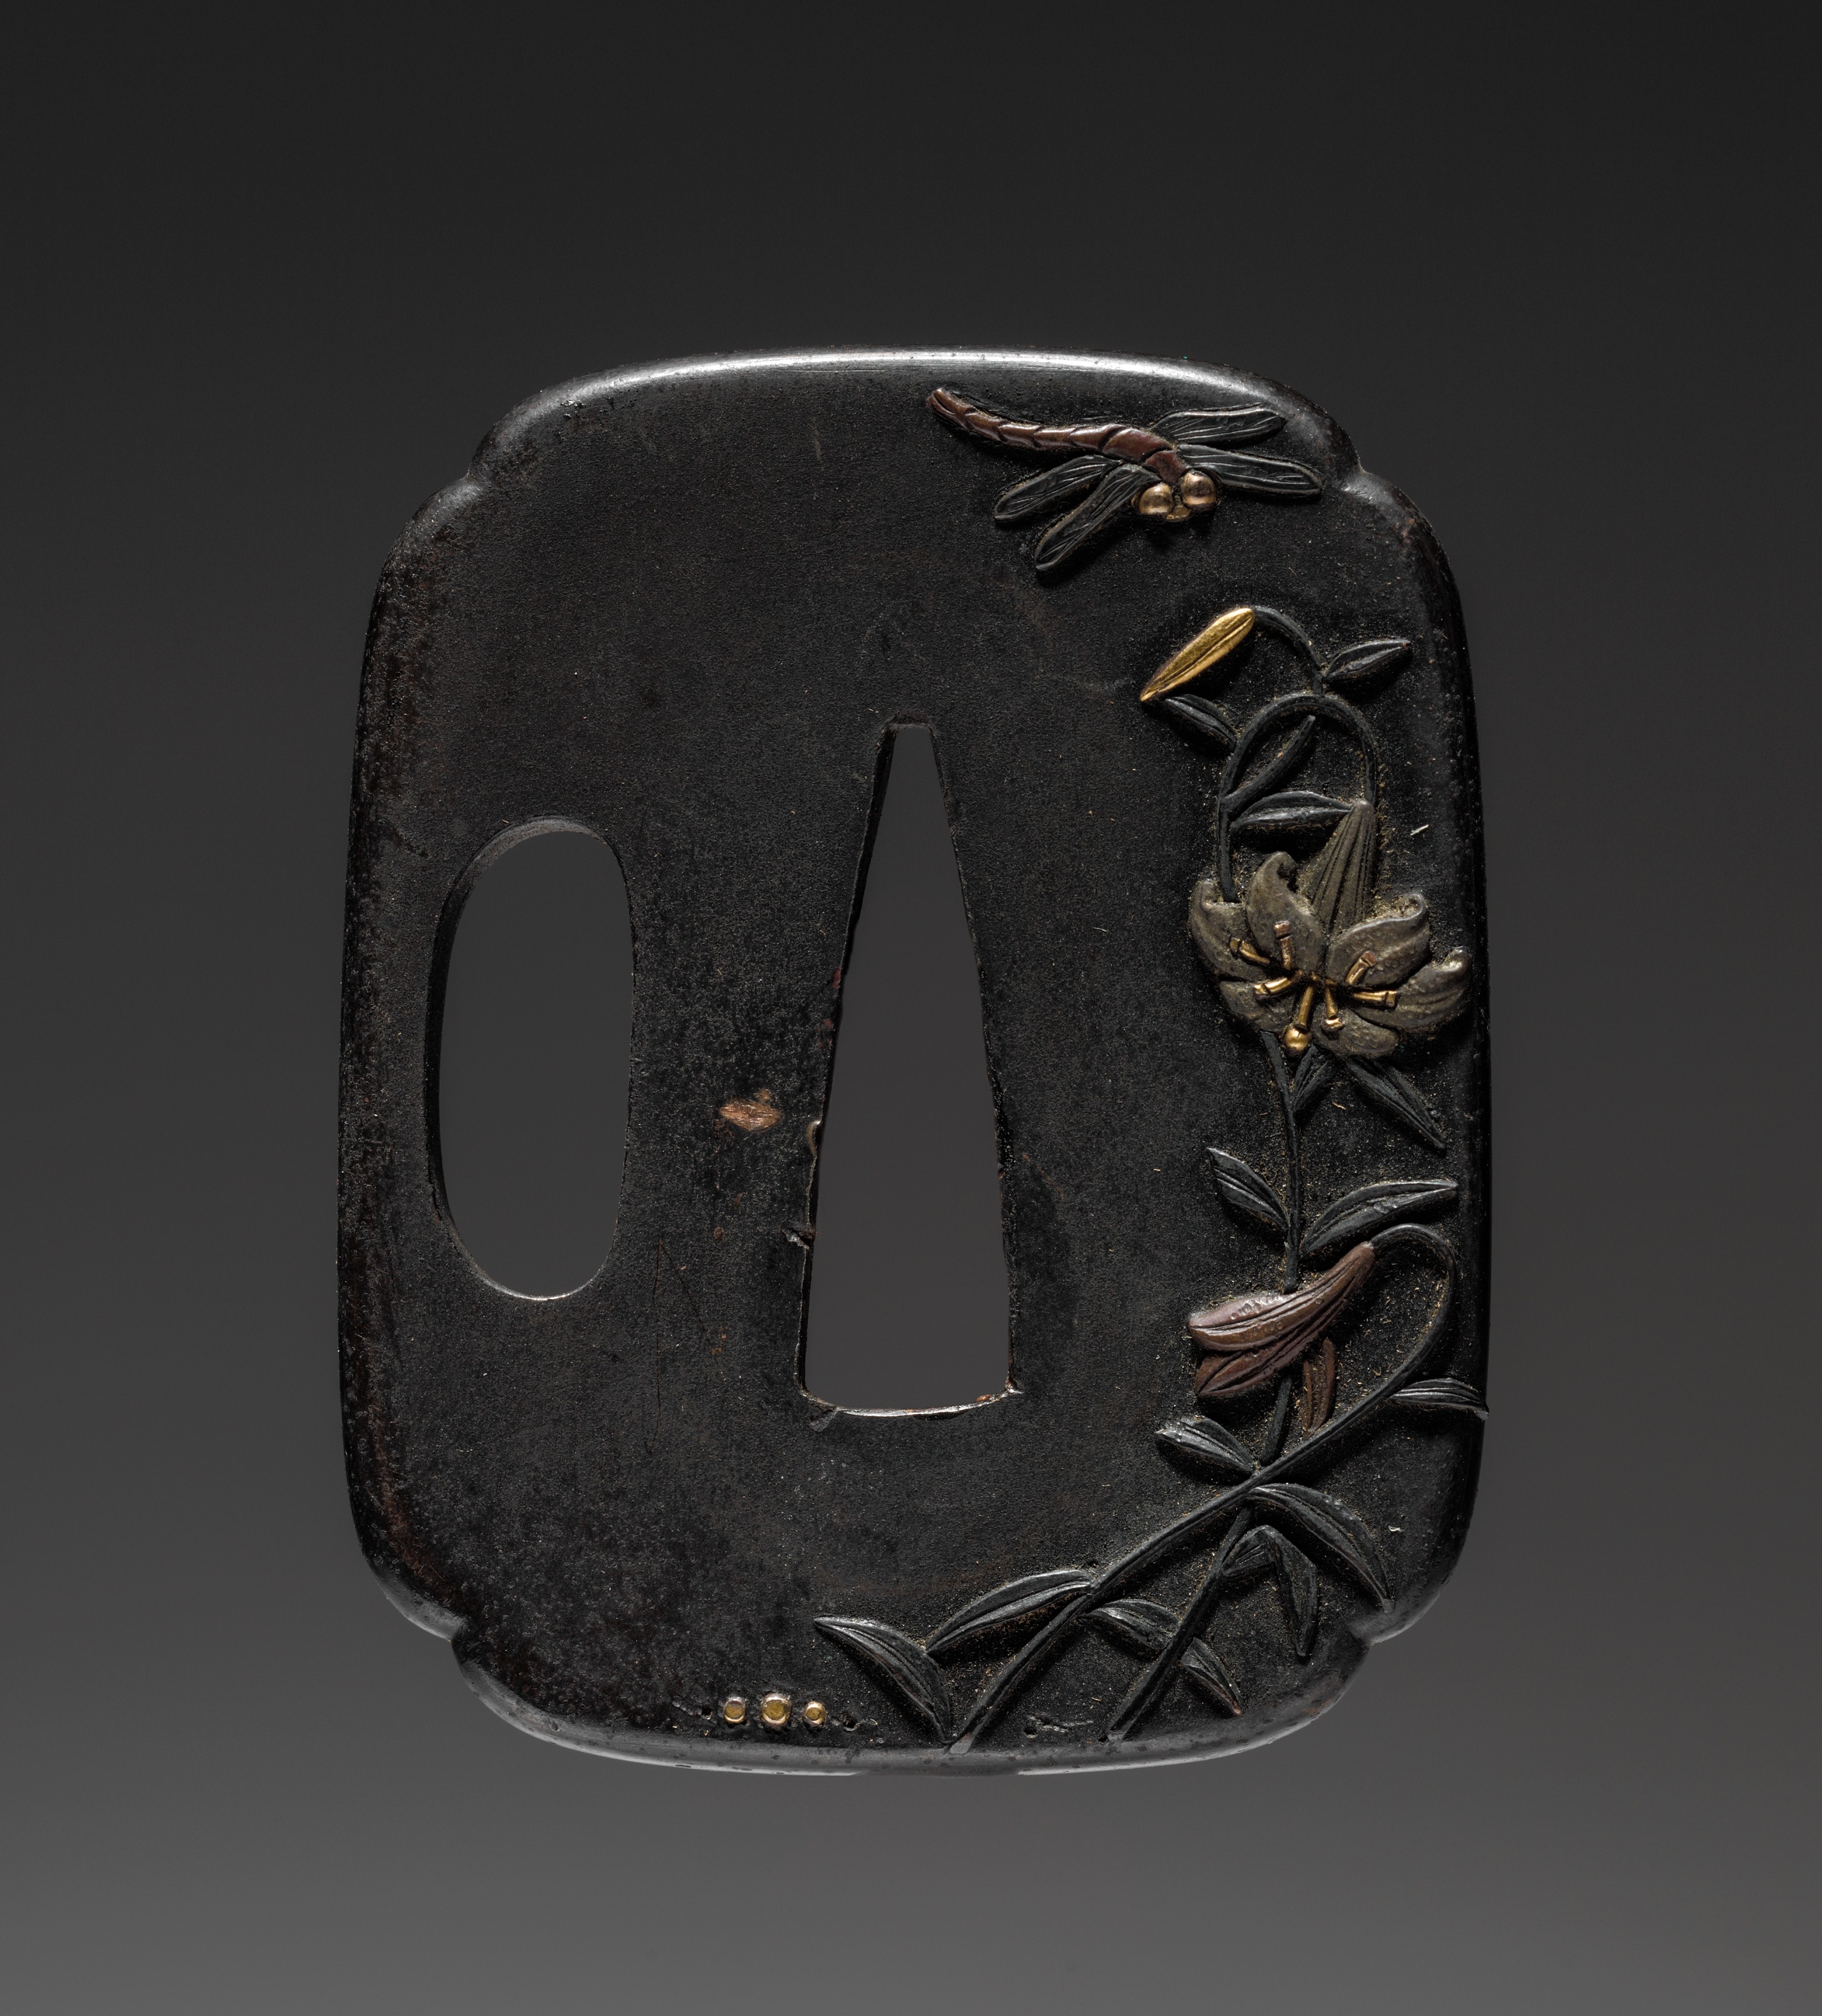 Sword Guard (Tsuba) with Dragonfly and Lily